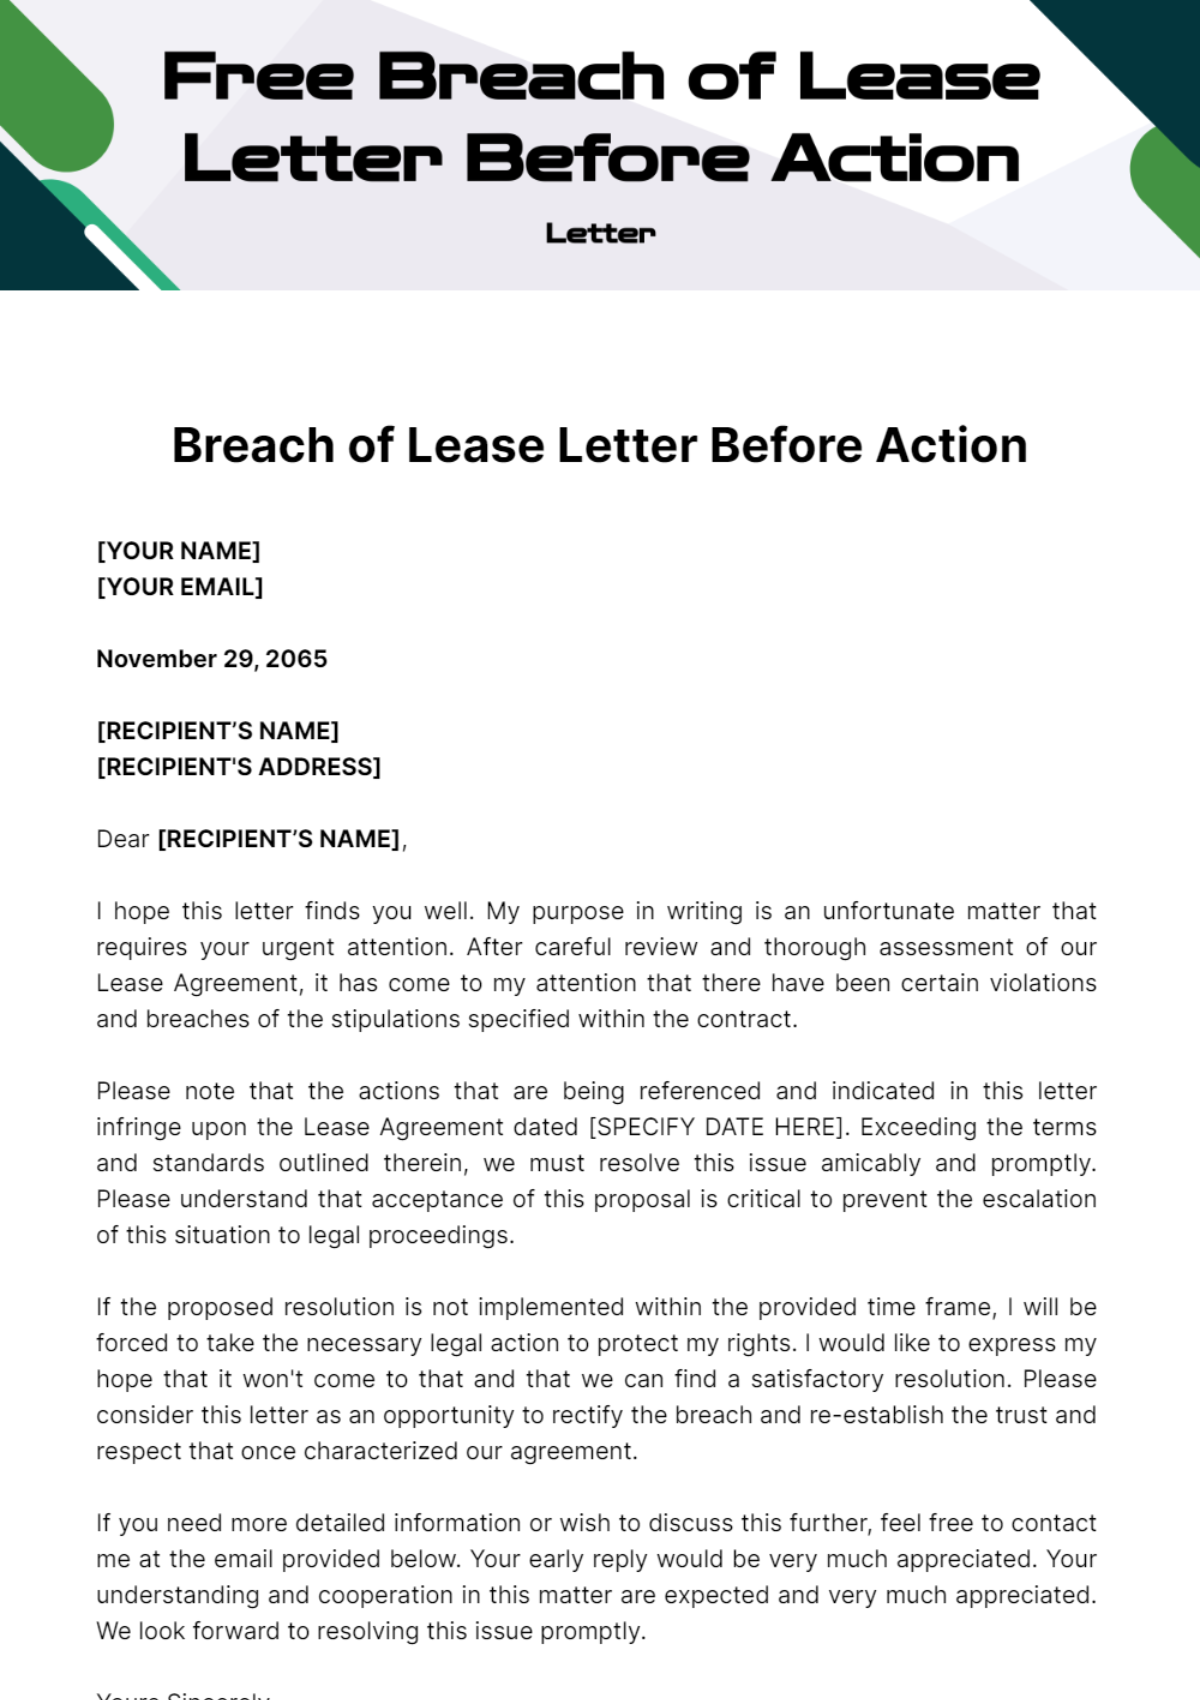 Free Breach of Lease Letter Before Action Template